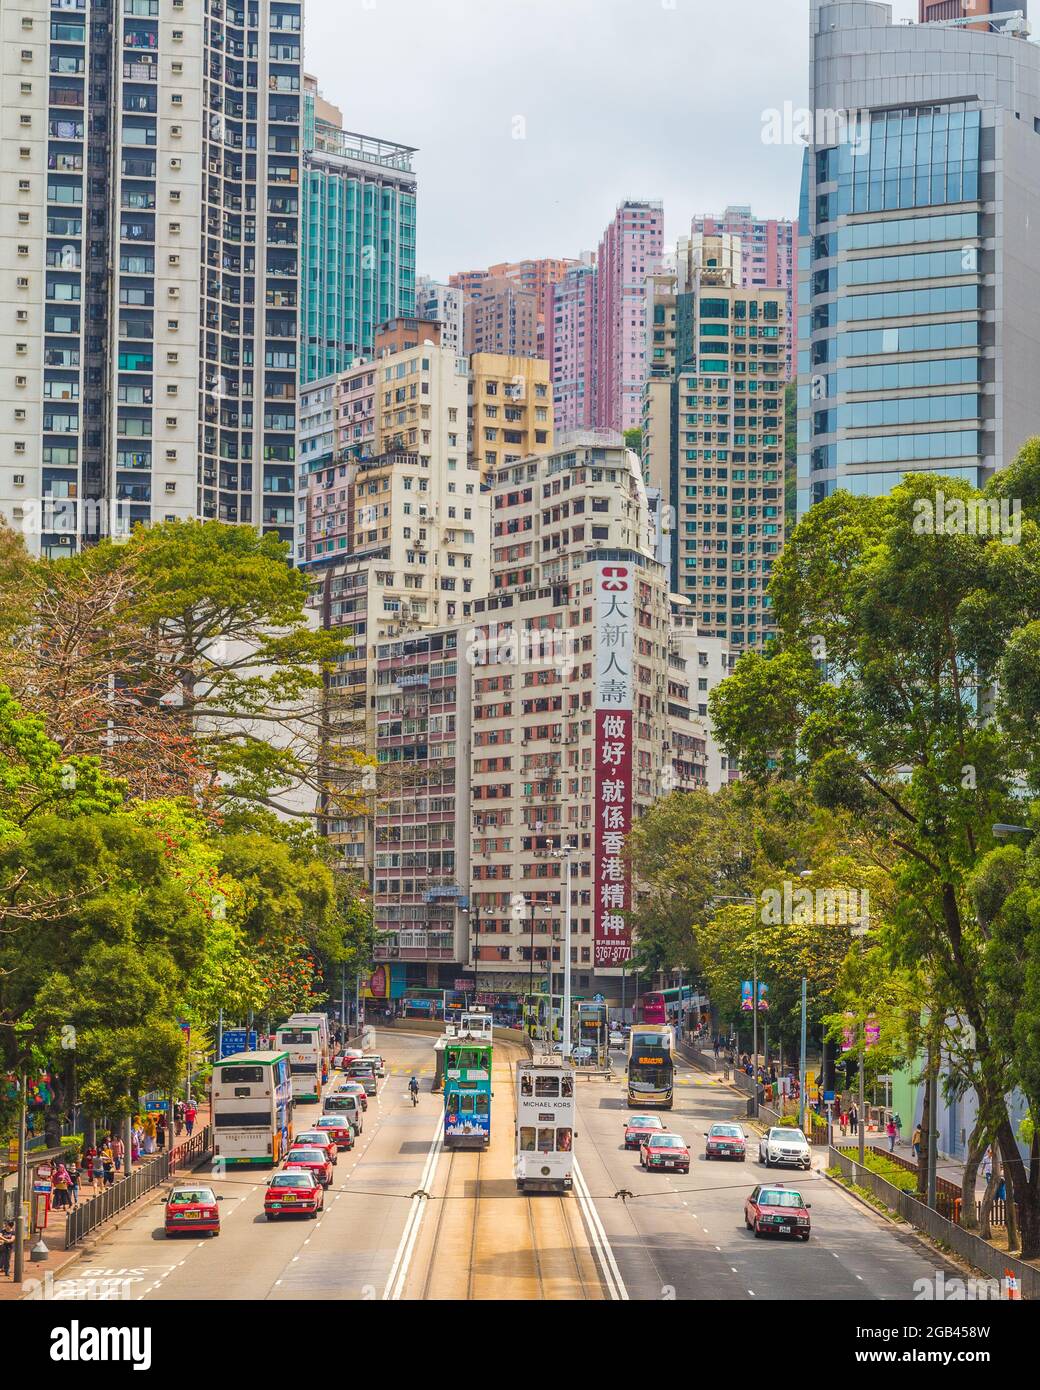 HONG KONG, HONG KONG - 9TH APRIL 2017: Streets of Hong Kong Island during the day. The outside of buildings, cars, buses and people can be seen. Stock Photo